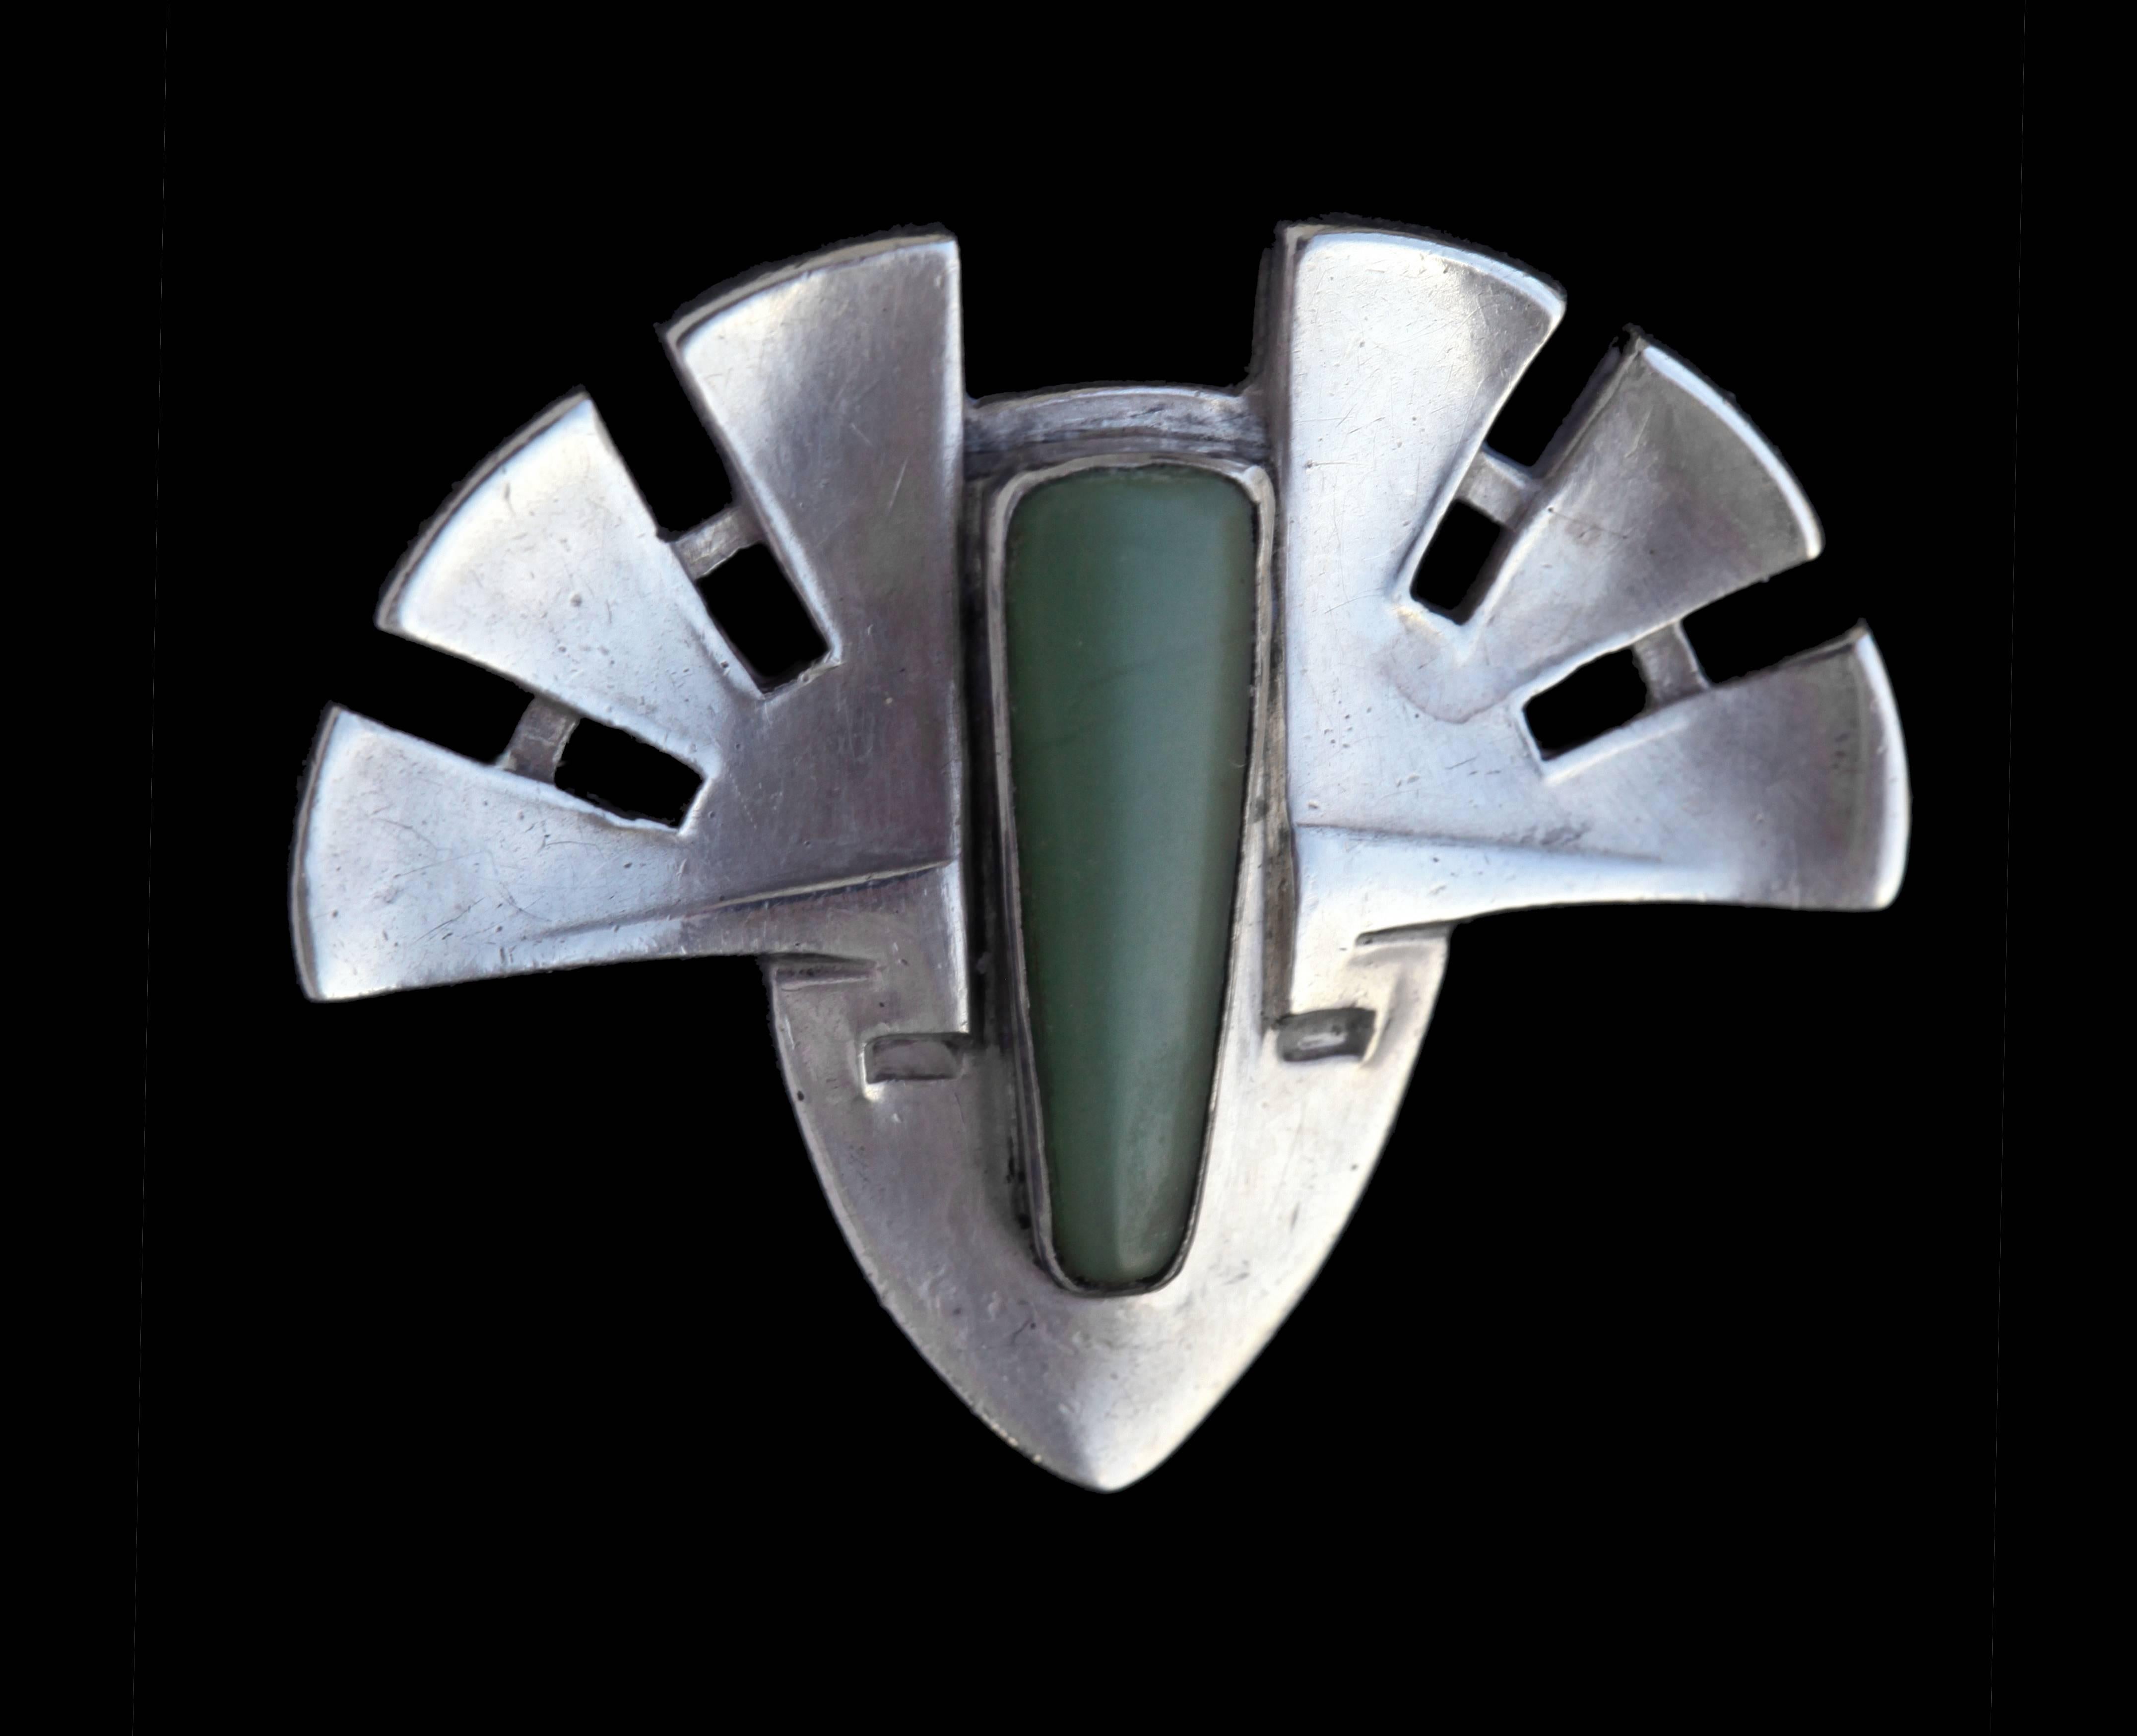 Rare Patriz Huber Jugendstil brooch for Theodor Fahrner & Murrle Bennett & Co.
A very successful example of one of Huber's masterly abstract designs applied to an Aztec mask. 
Literature: cf. Theodor Fahrner Schmuck, Schmuckmuseum,